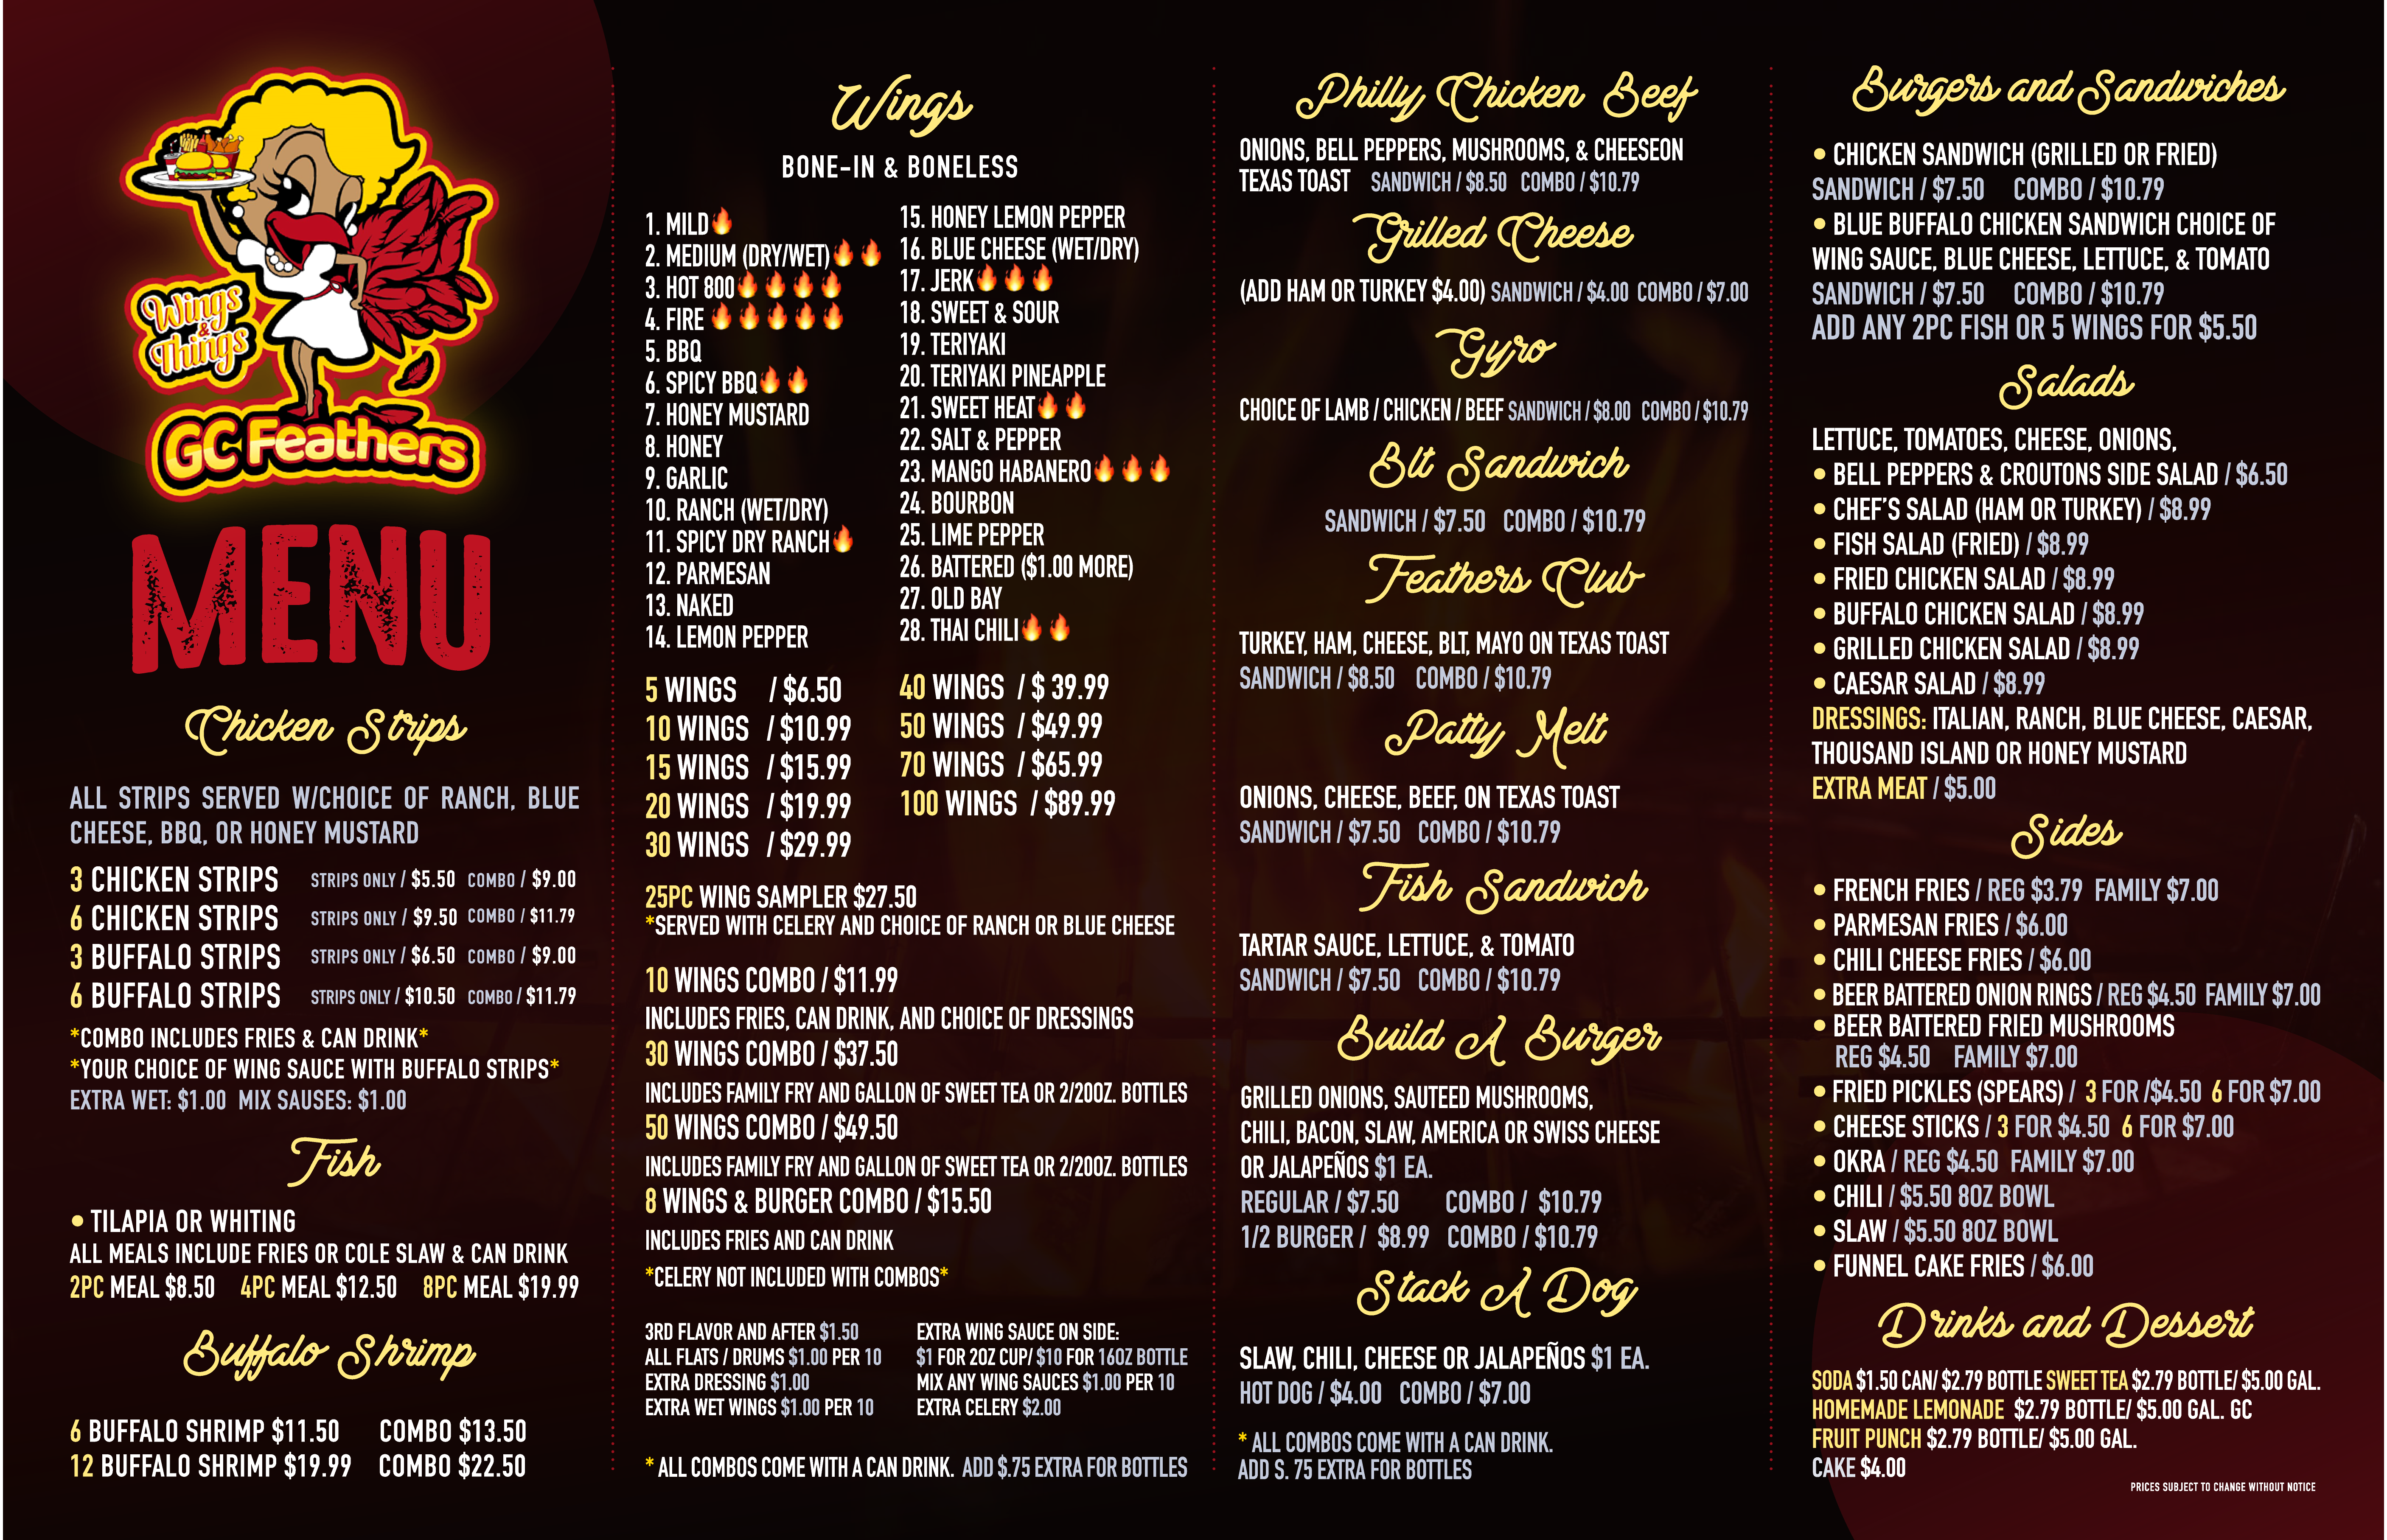 Menu for gcf (golden chicken feathers) featuring a variety of wings, sandwiches, burgers, and side dishes with prices.